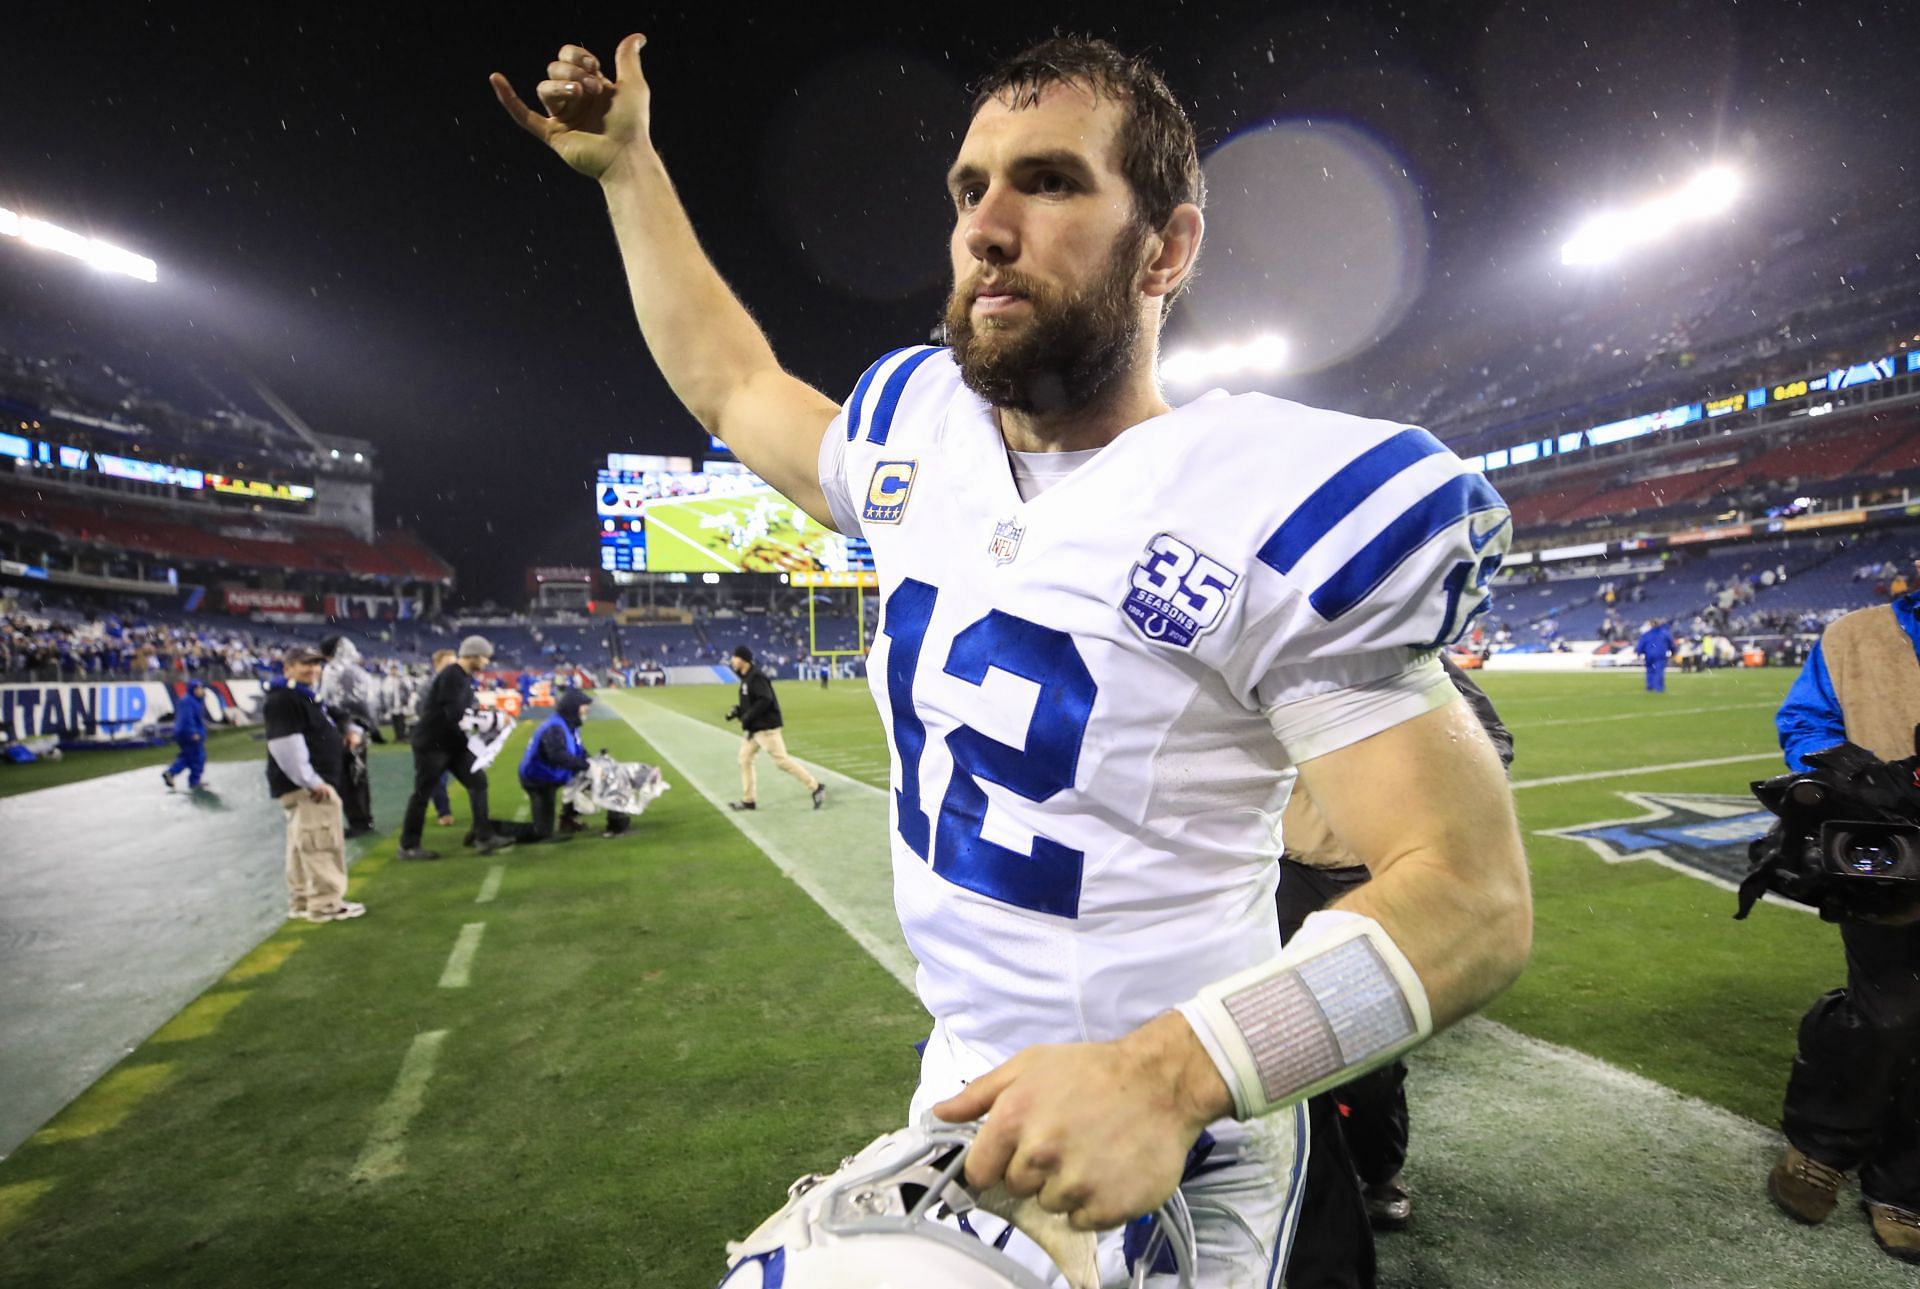 Andrew Luck's lack of arm strength is a serious issue for the Colts